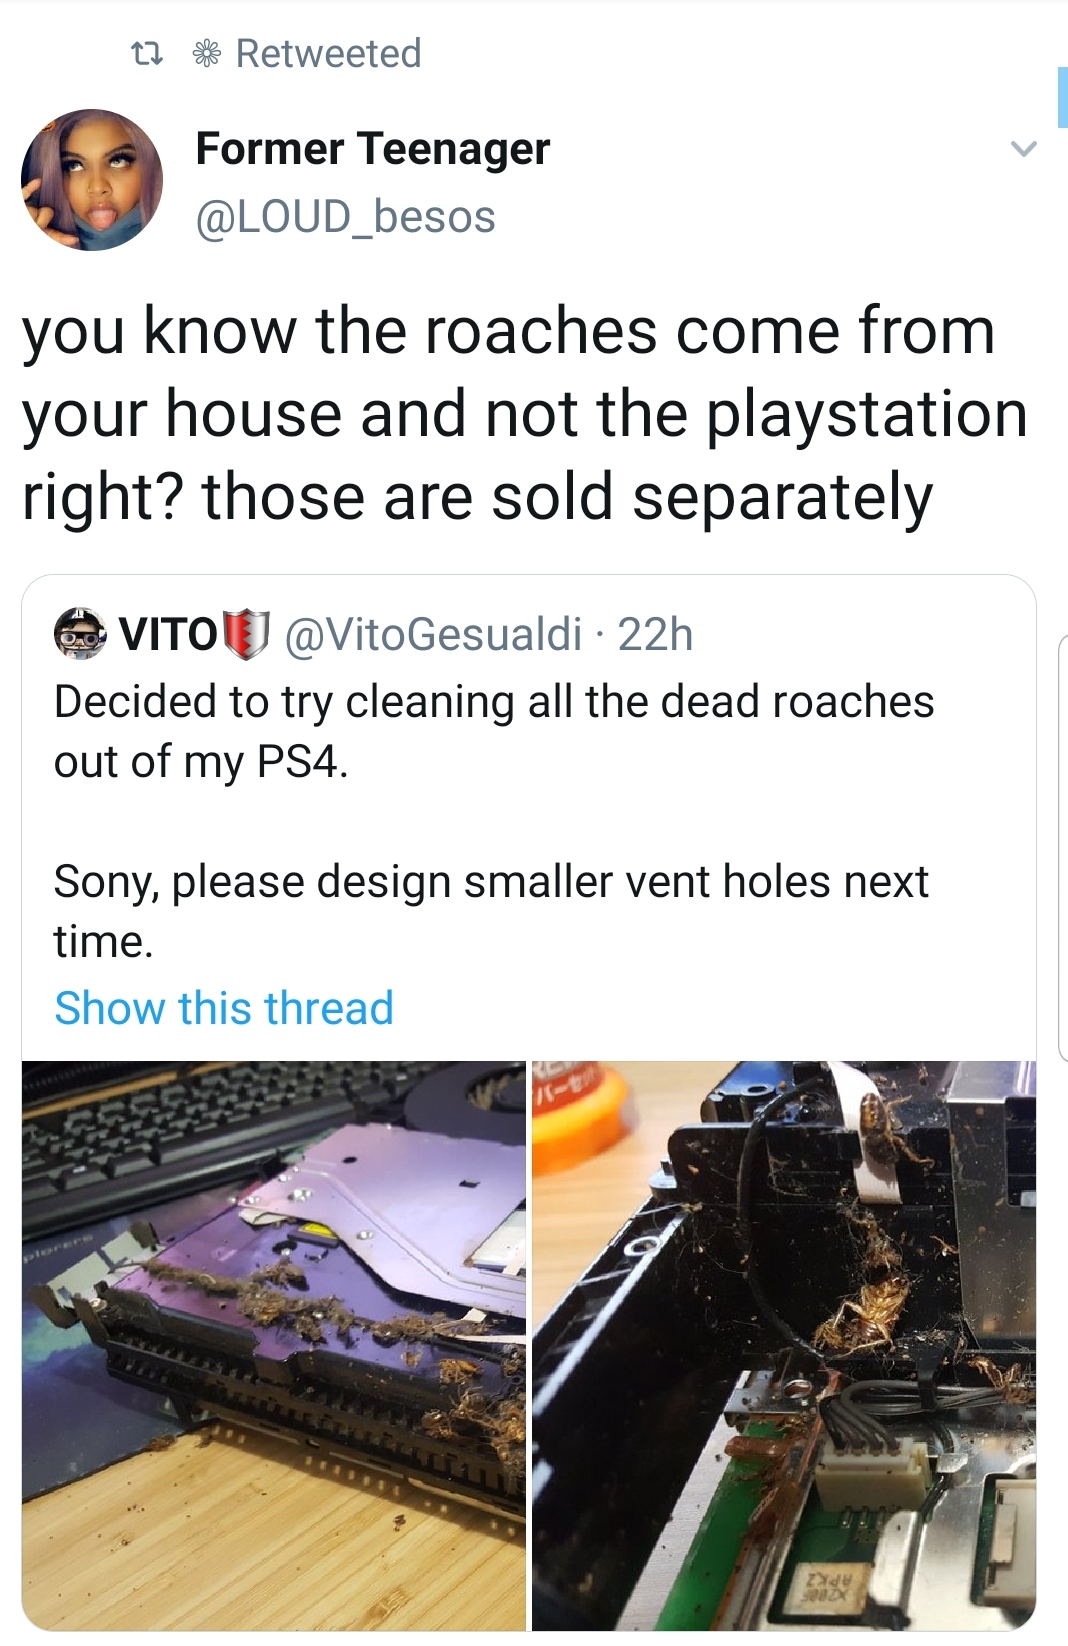 material - t7 Retweeted Former Teenager you know the roaches come from your house and not the playstation right? those are sold separately Vitolu Gesualdi22h Decided to try cleaning all the dead roaches out of my PS4. Sony, please design smaller vent hole